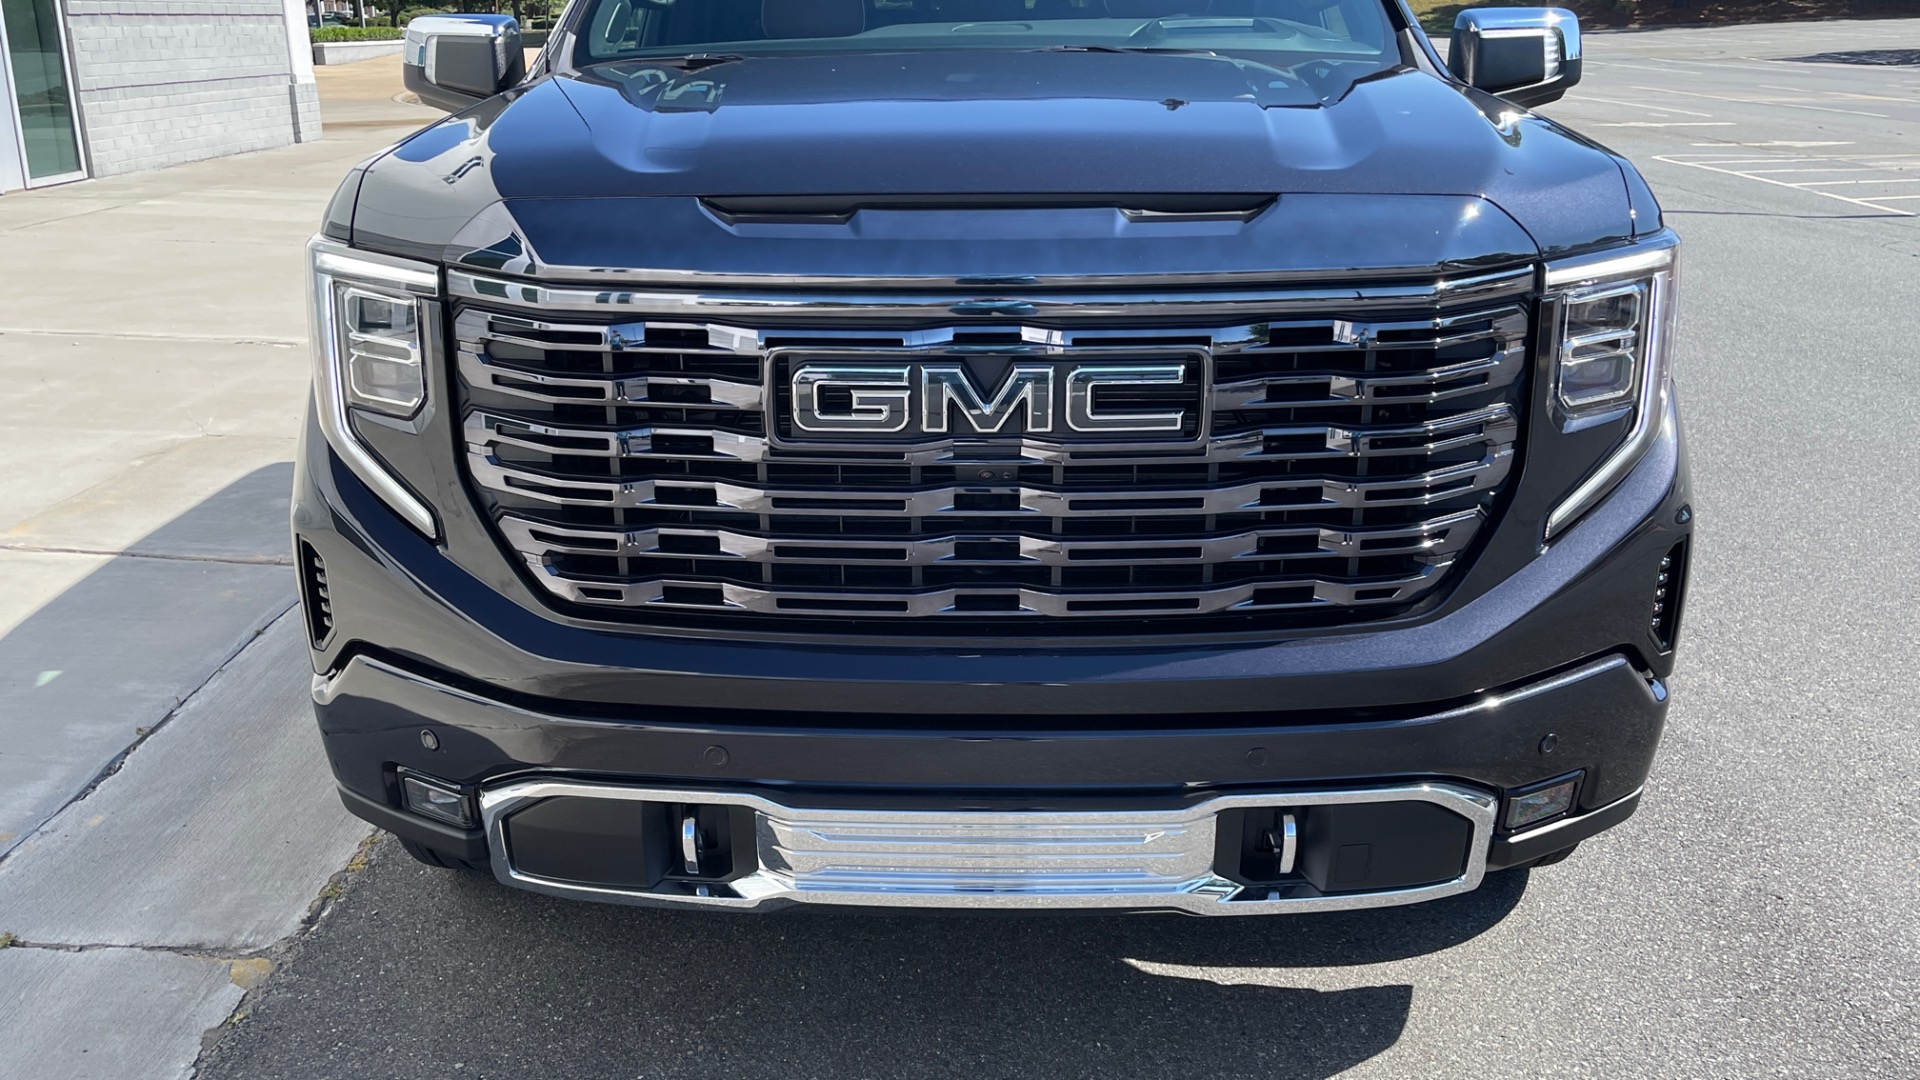 Used 2022 GMC Sierra 1500 DENALI ULTIMATE / 6.2L V8 / 22IN WHEELS / LEATHER / COOLED SEATS for sale $110,500 at Formula Imports in Charlotte NC 28227 11